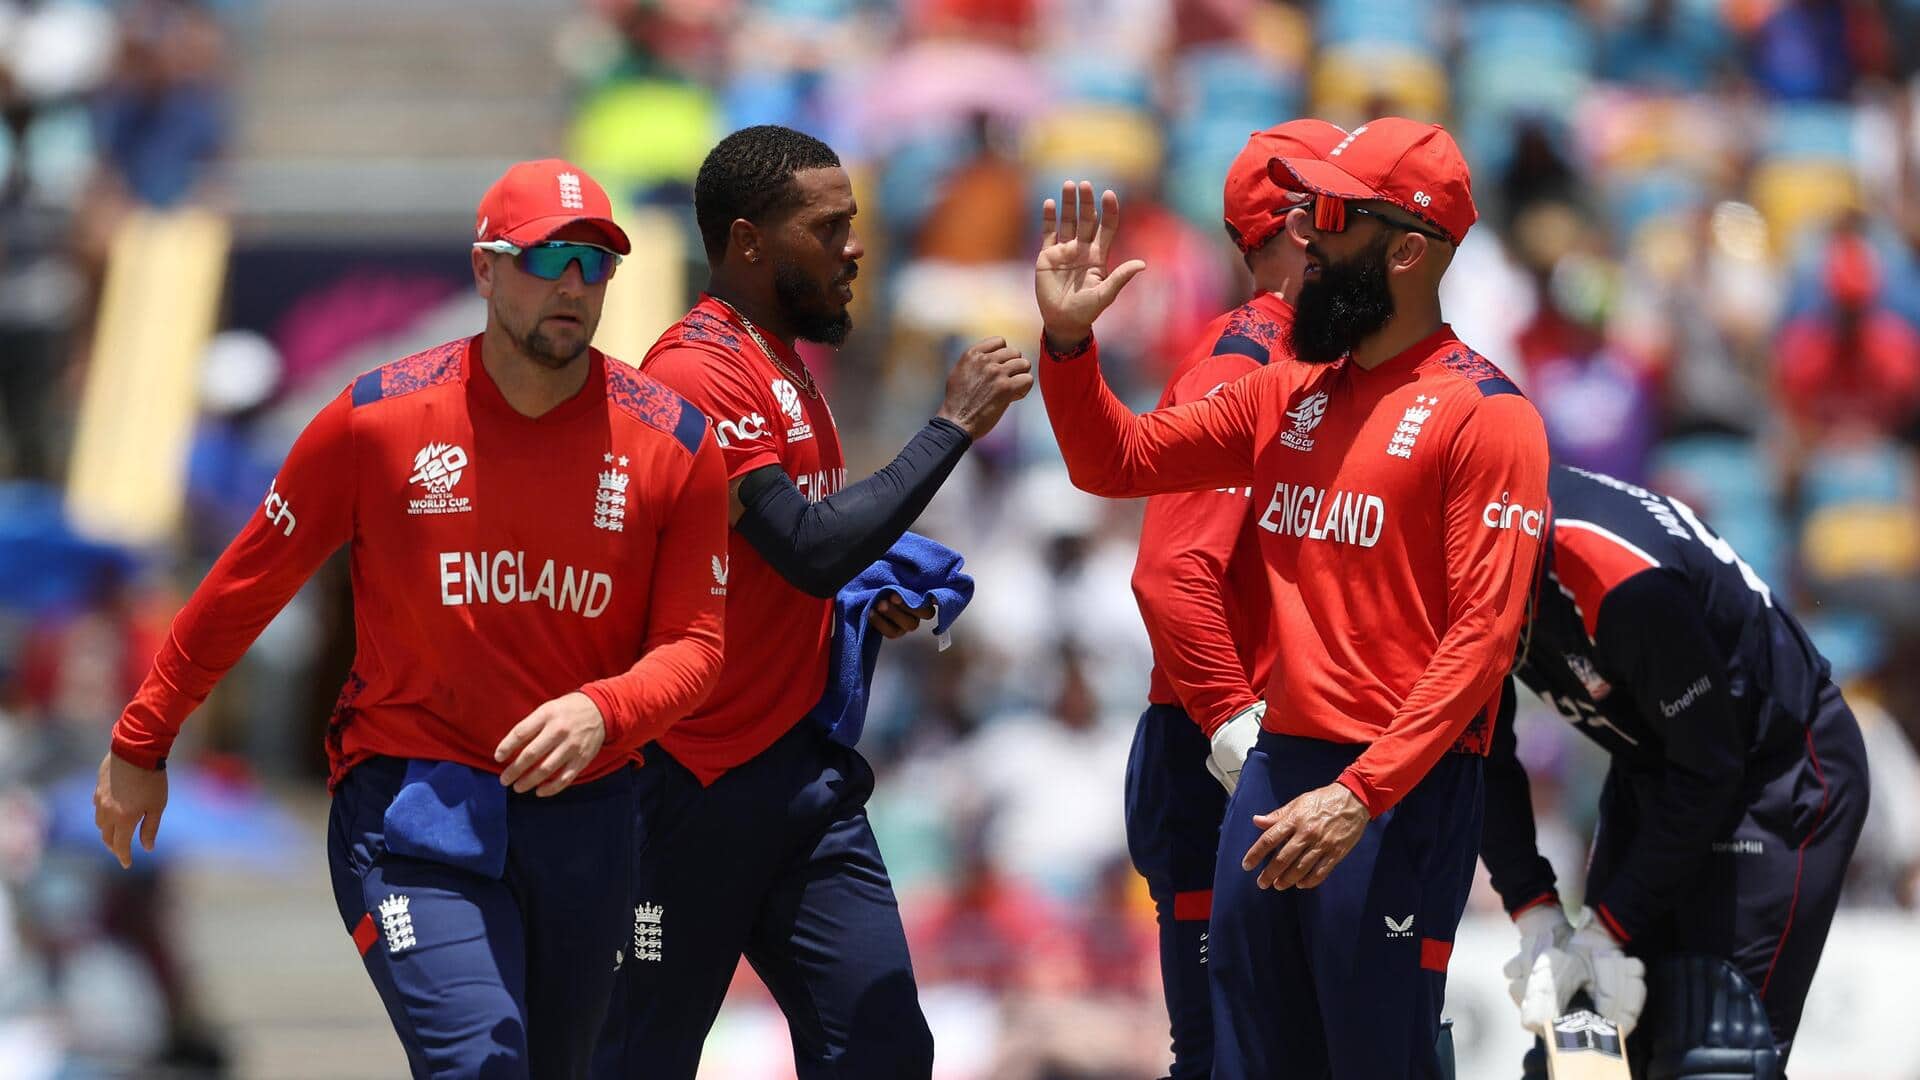 Chris Jordan becomes first English bowler with T20I hat-trick: Stats